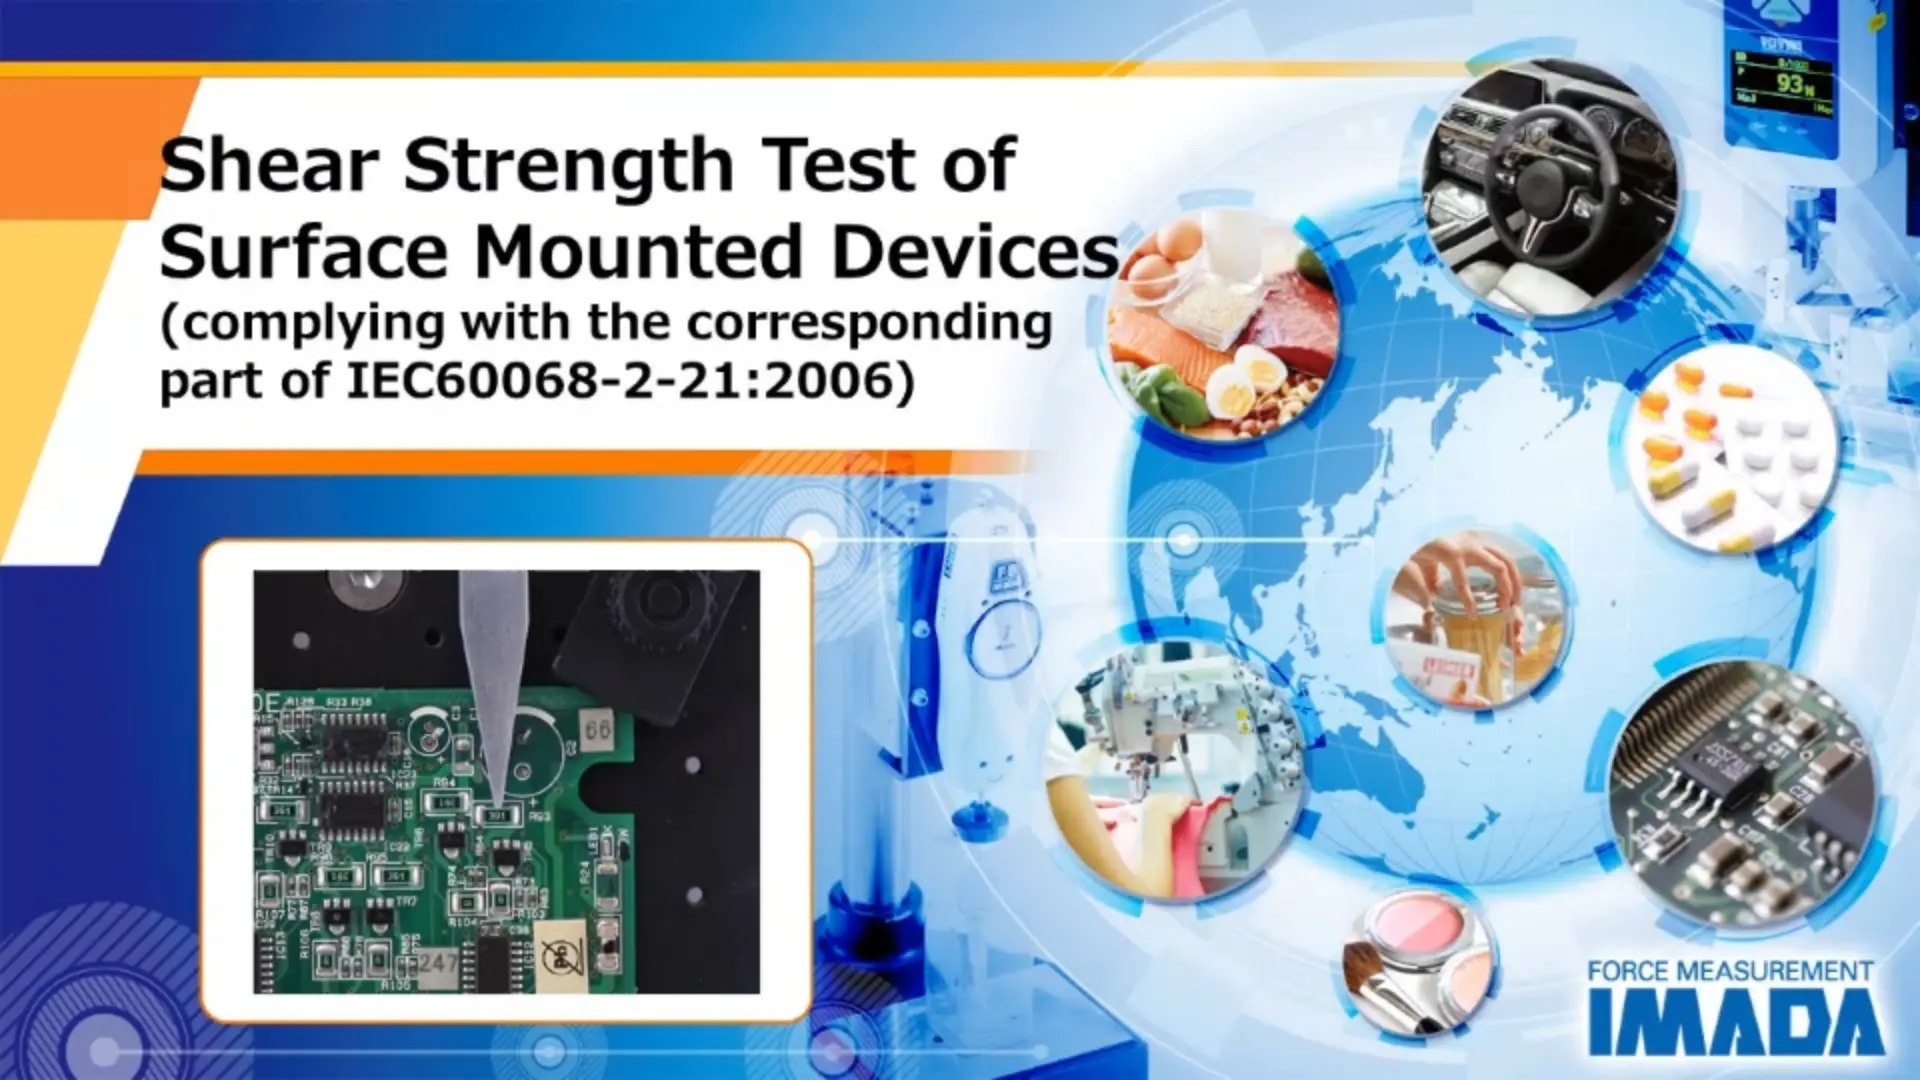 Shear Strength Test of Surface Mounted Devices (complies with the corresponding part of IEC60068-2-21:2006)